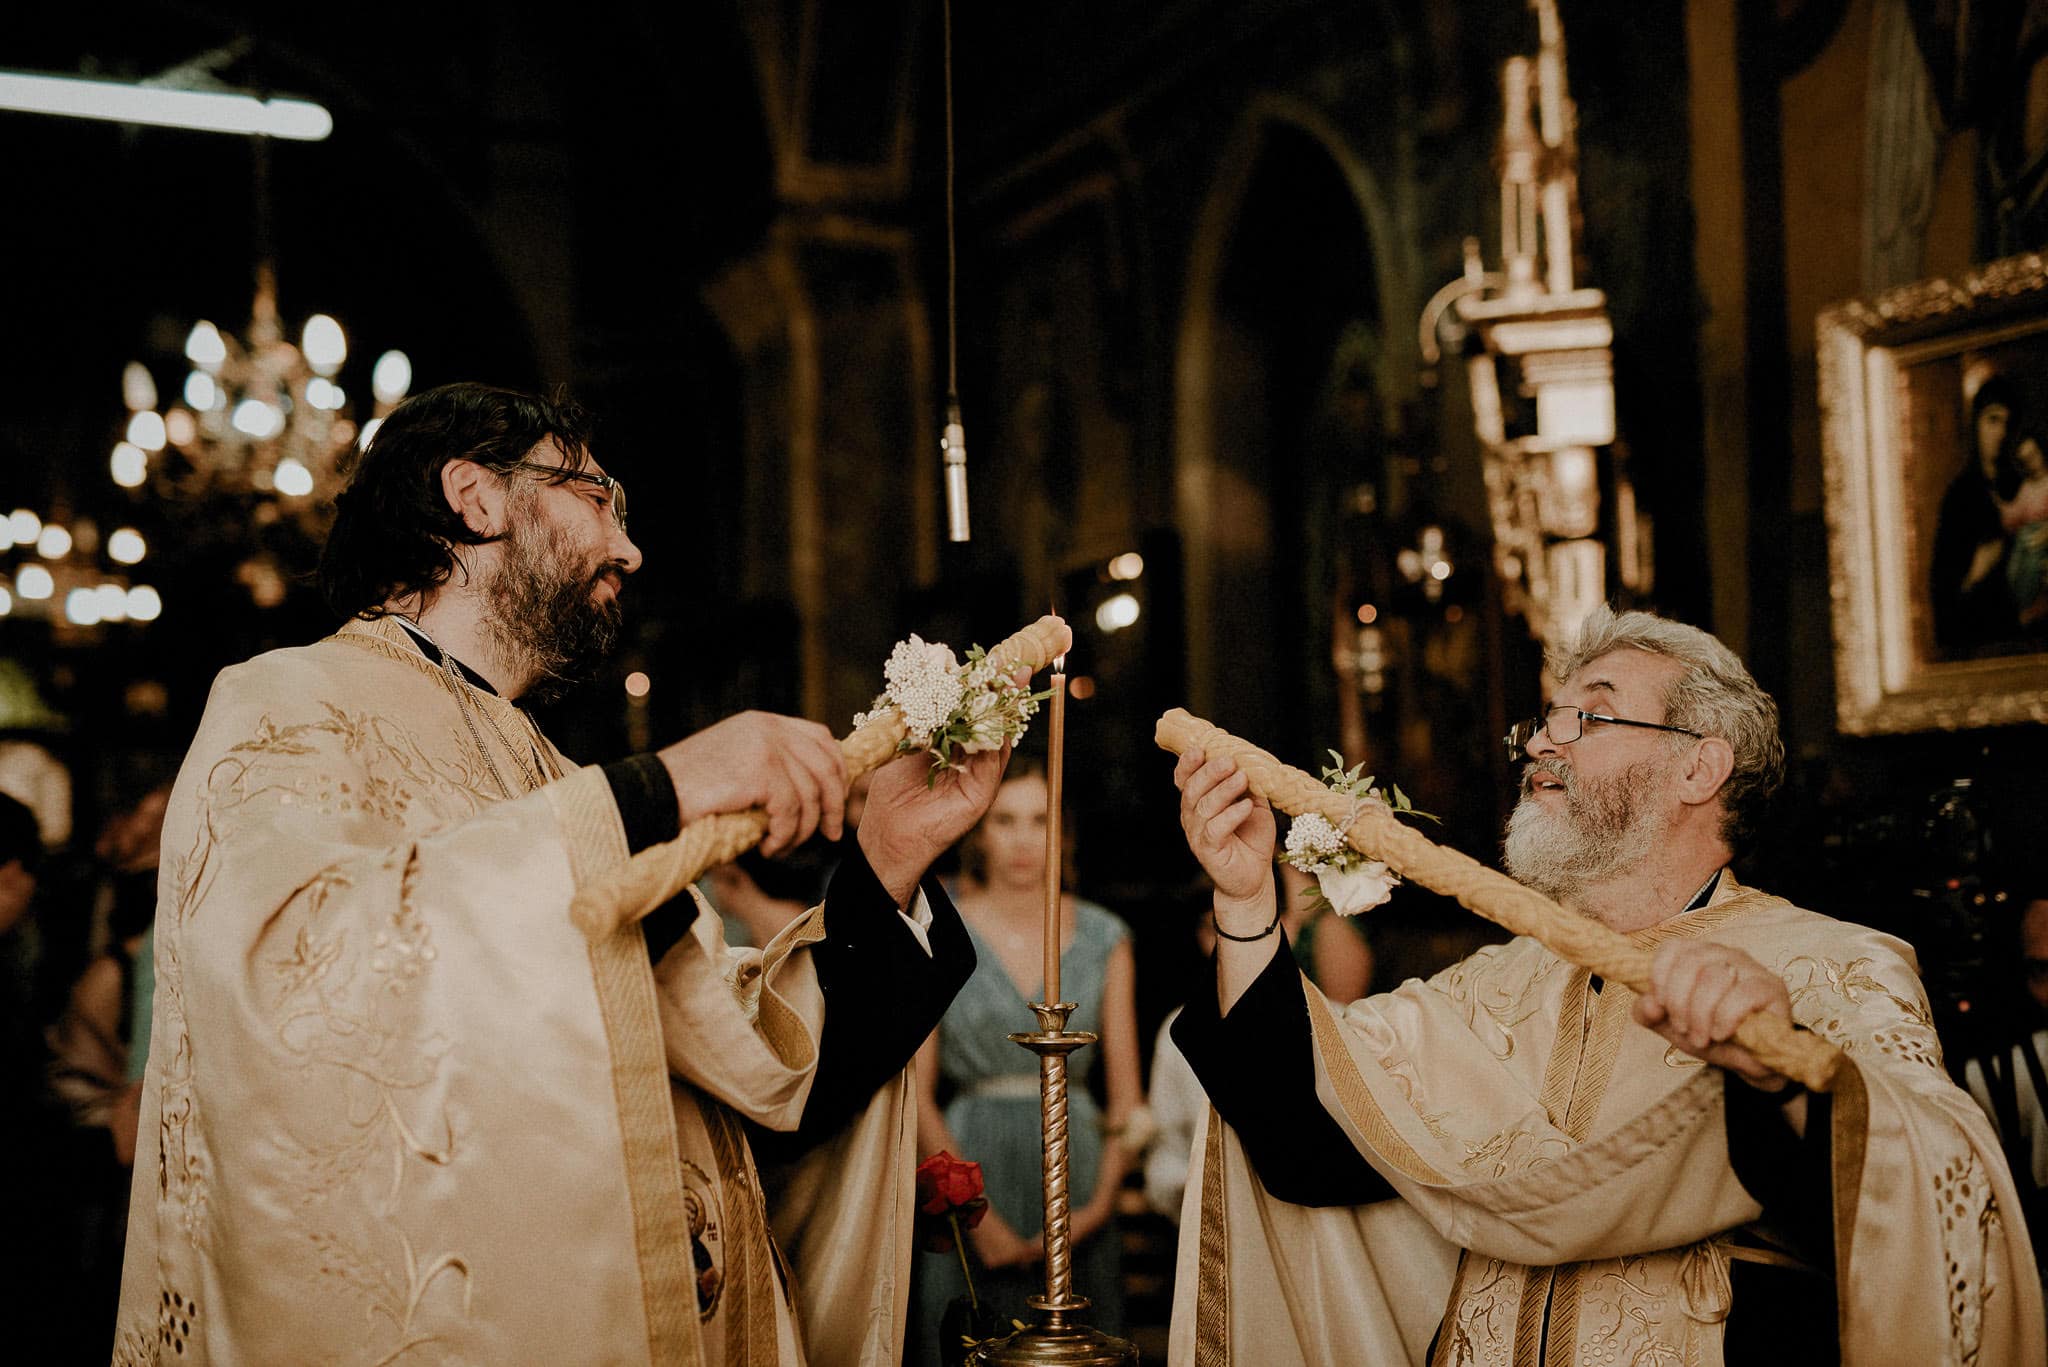 priests light the candles inside the church as the religious wedding ceremony begins